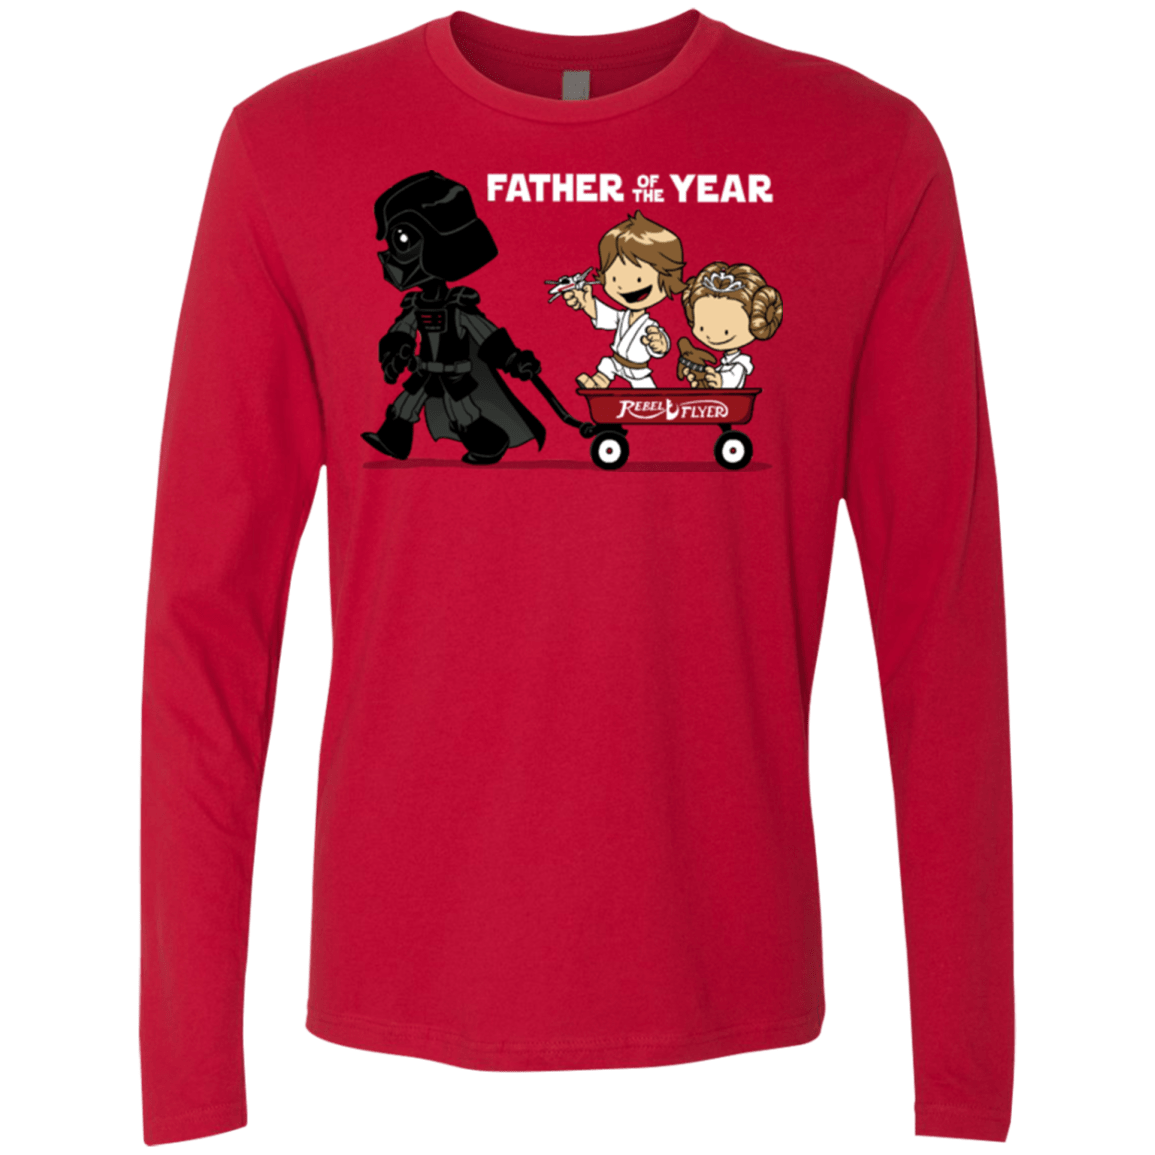 T-Shirts Red / Small WagonRide Men's Premium Long Sleeve